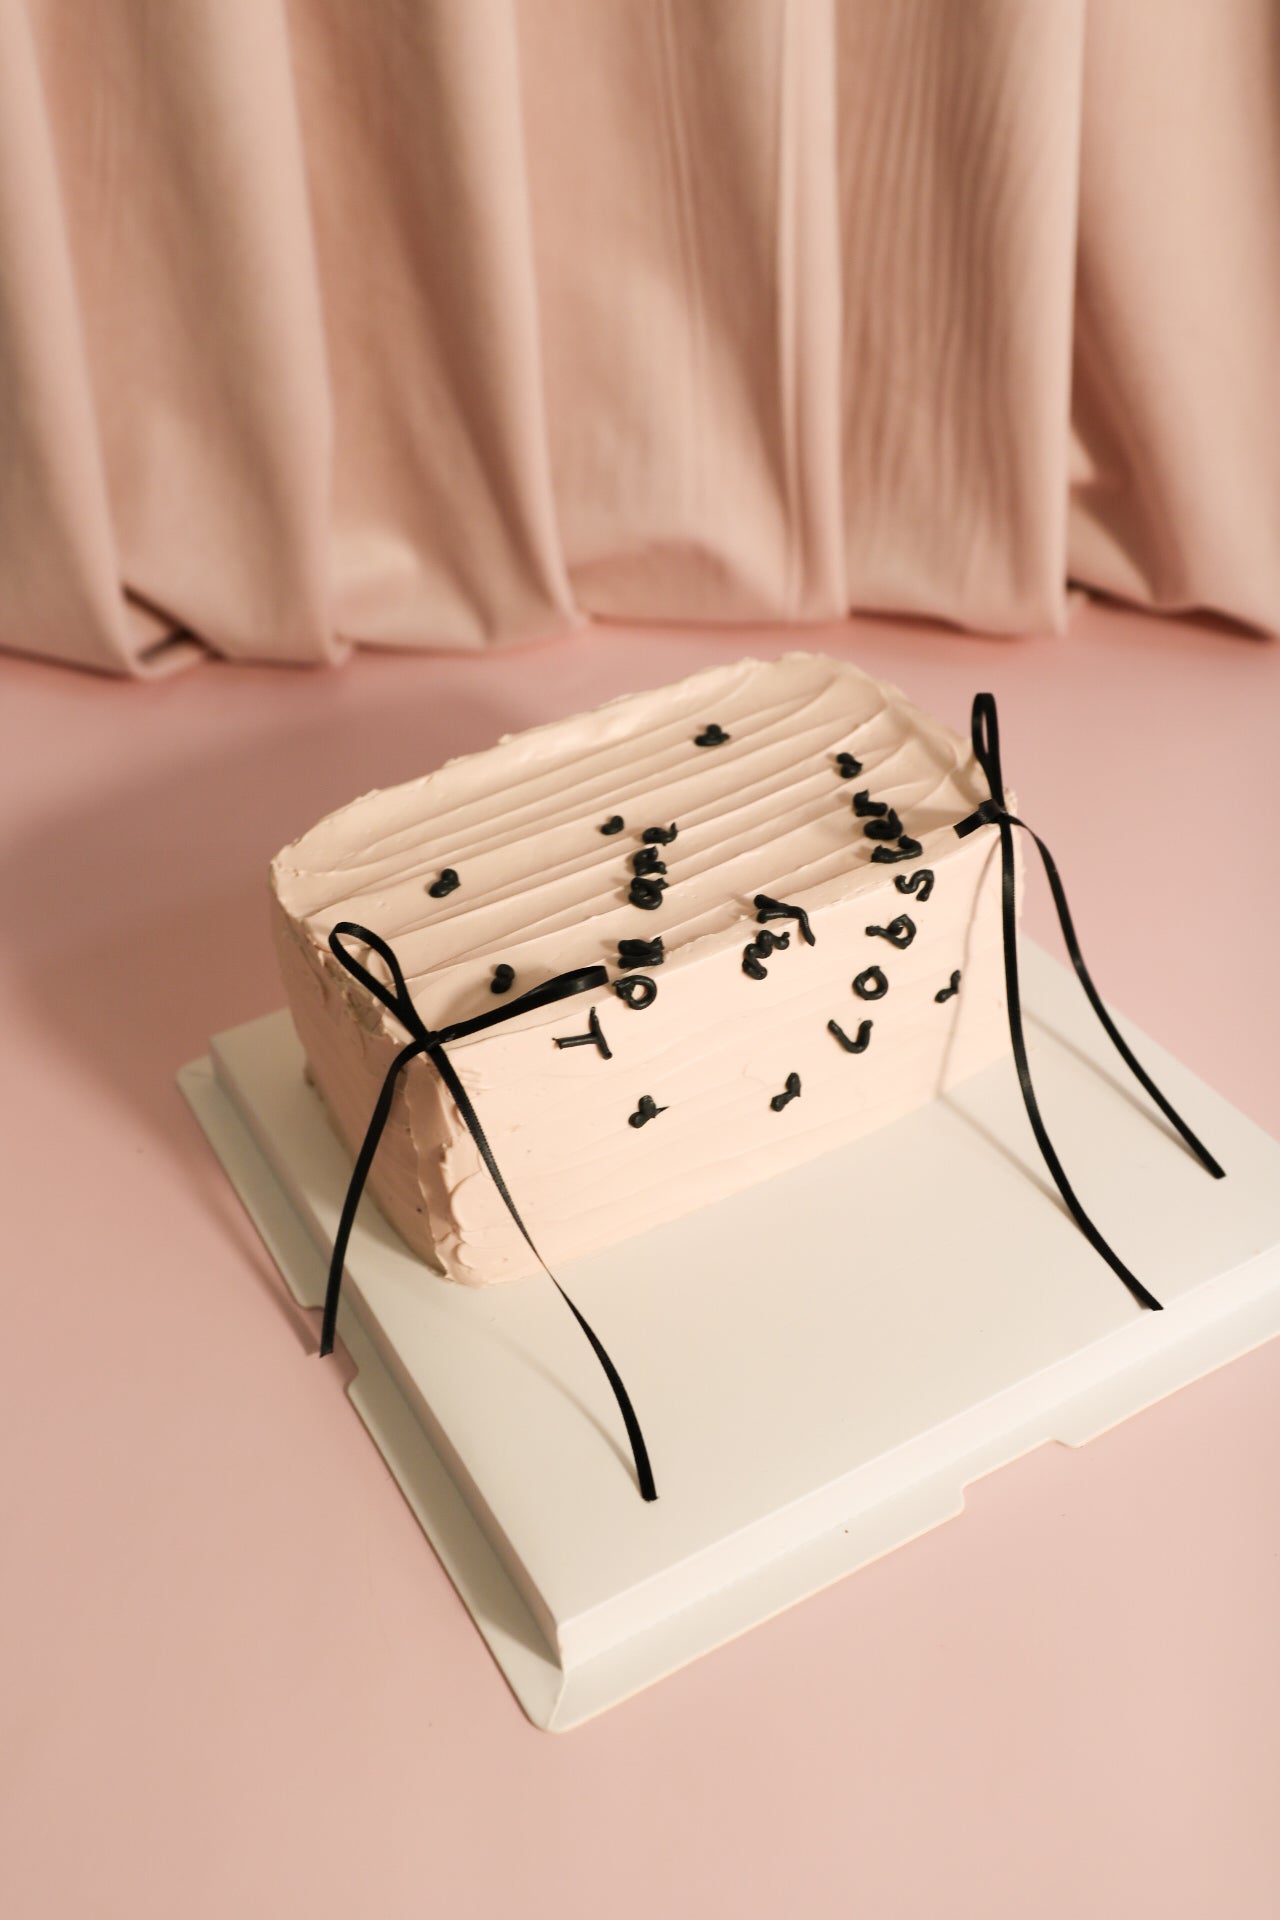 Light pink heartfelt message cake and two black ribbons